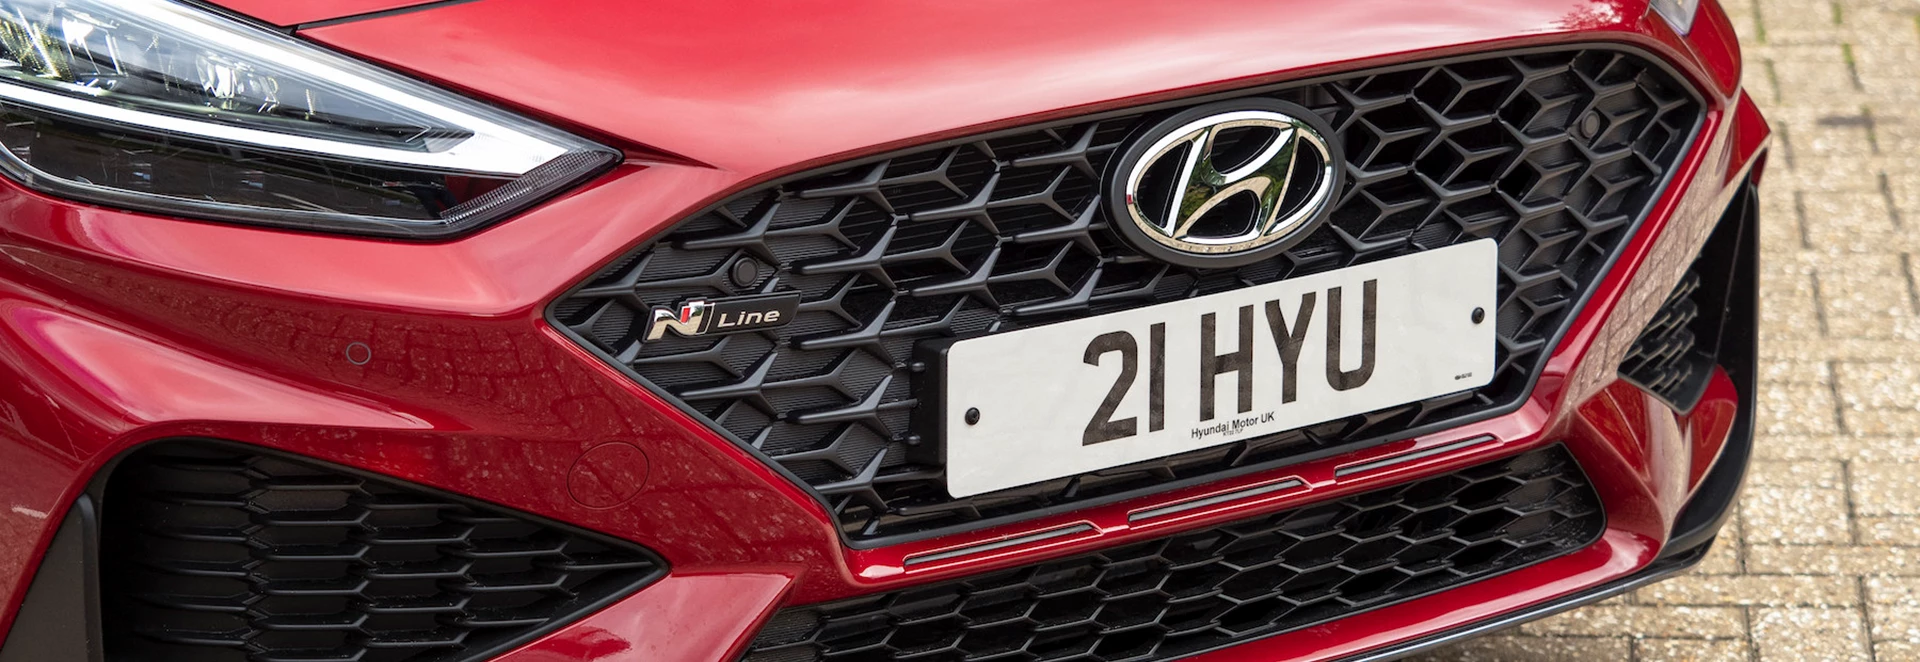 Hyundai commits to ‘price protecting’ all 2020 new car orders in event of a no-deal Brexit 